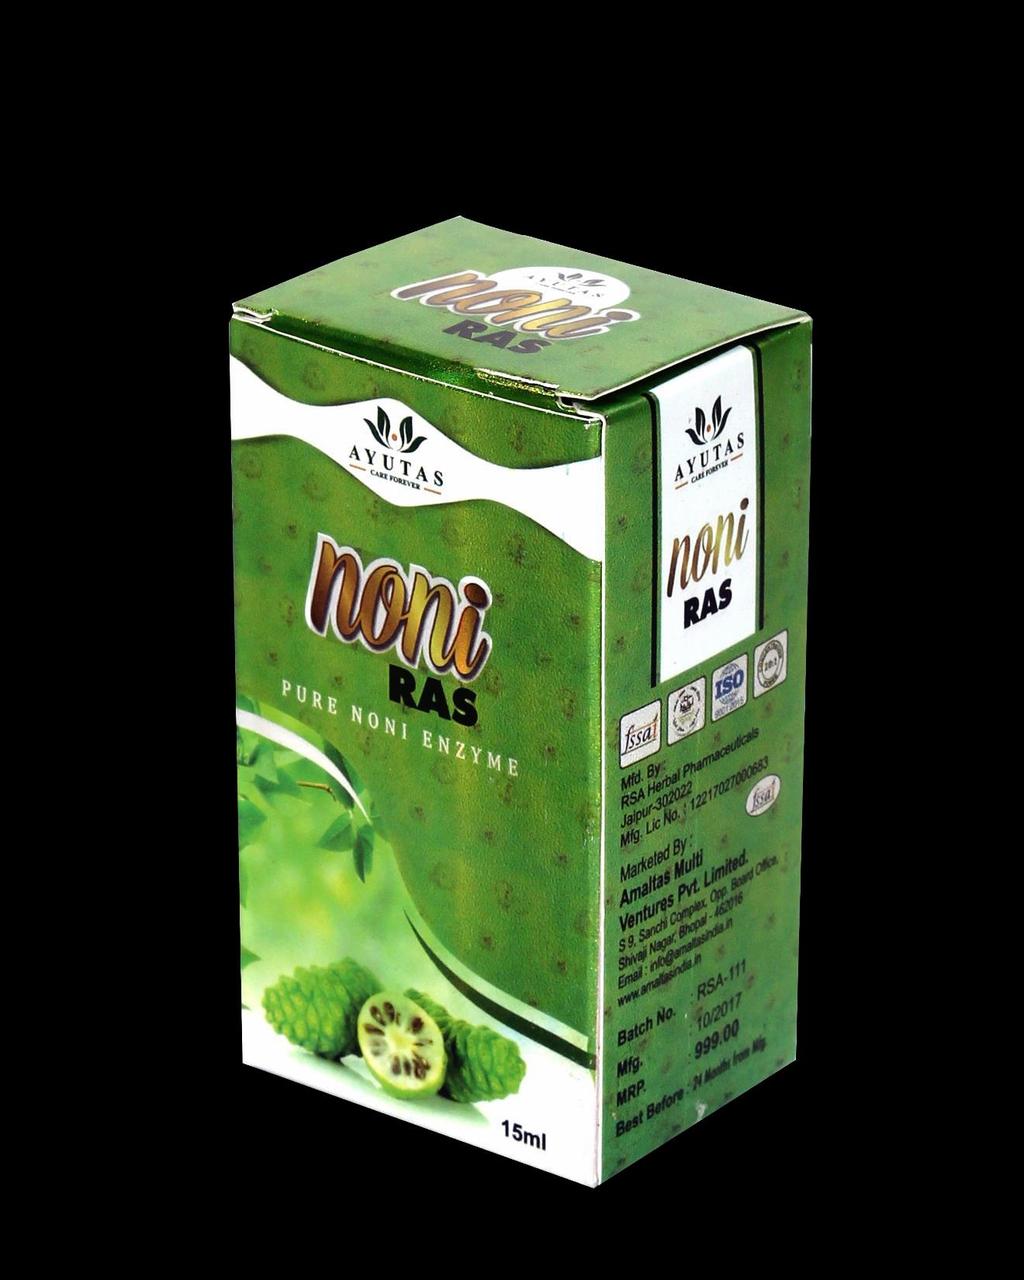 Content MRP-999 DP- 600 it s not advisable in Kidney Problems Pregnancy & Lactating Mothers.